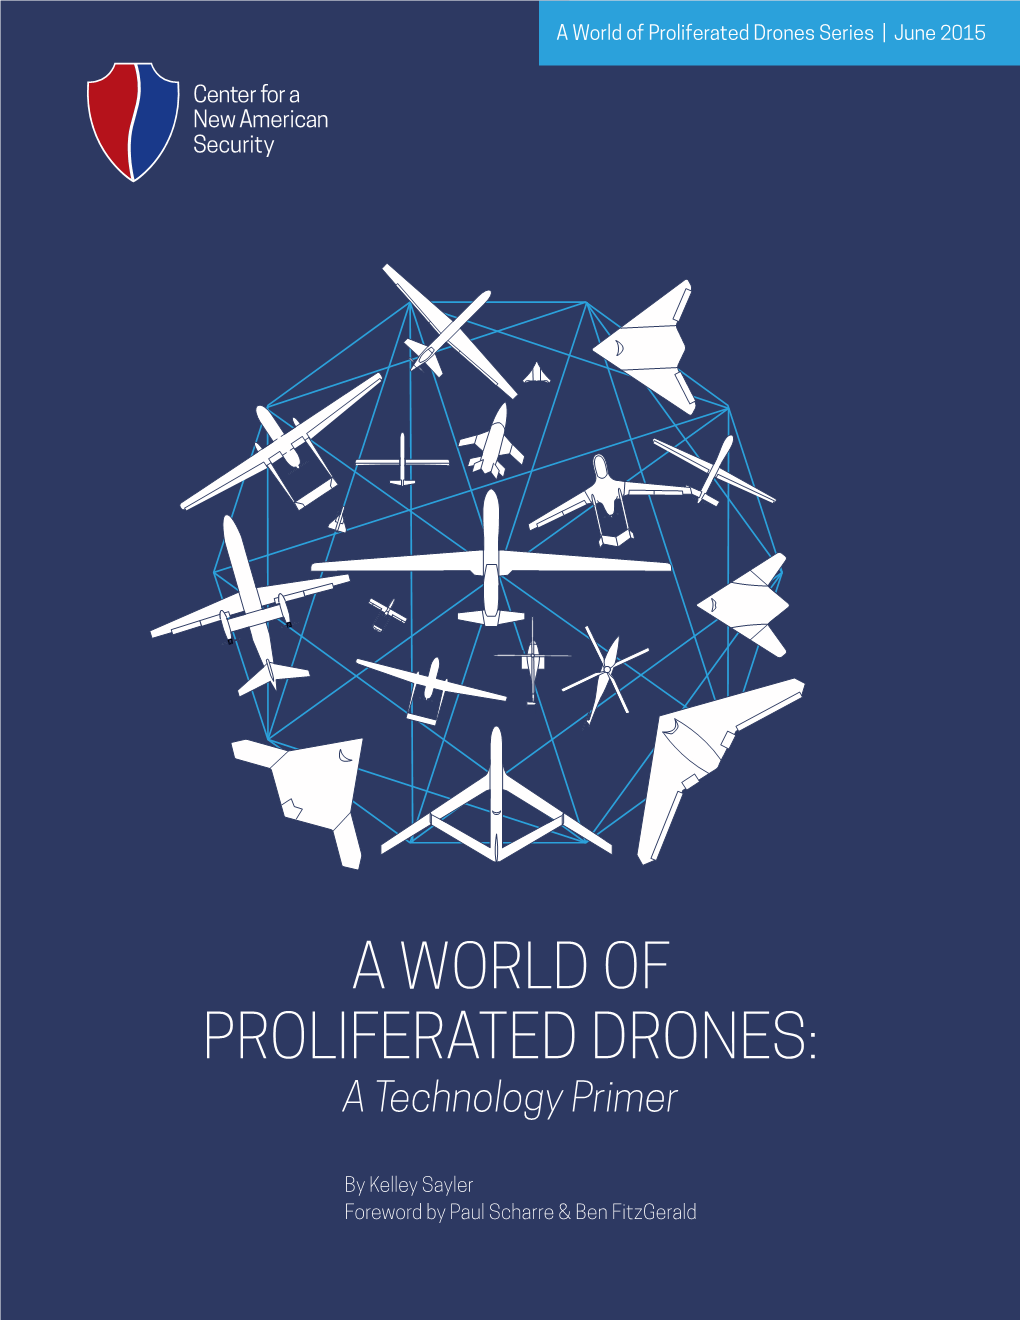 A WORLD of PROLIFERATED DRONES: a Technology Primer